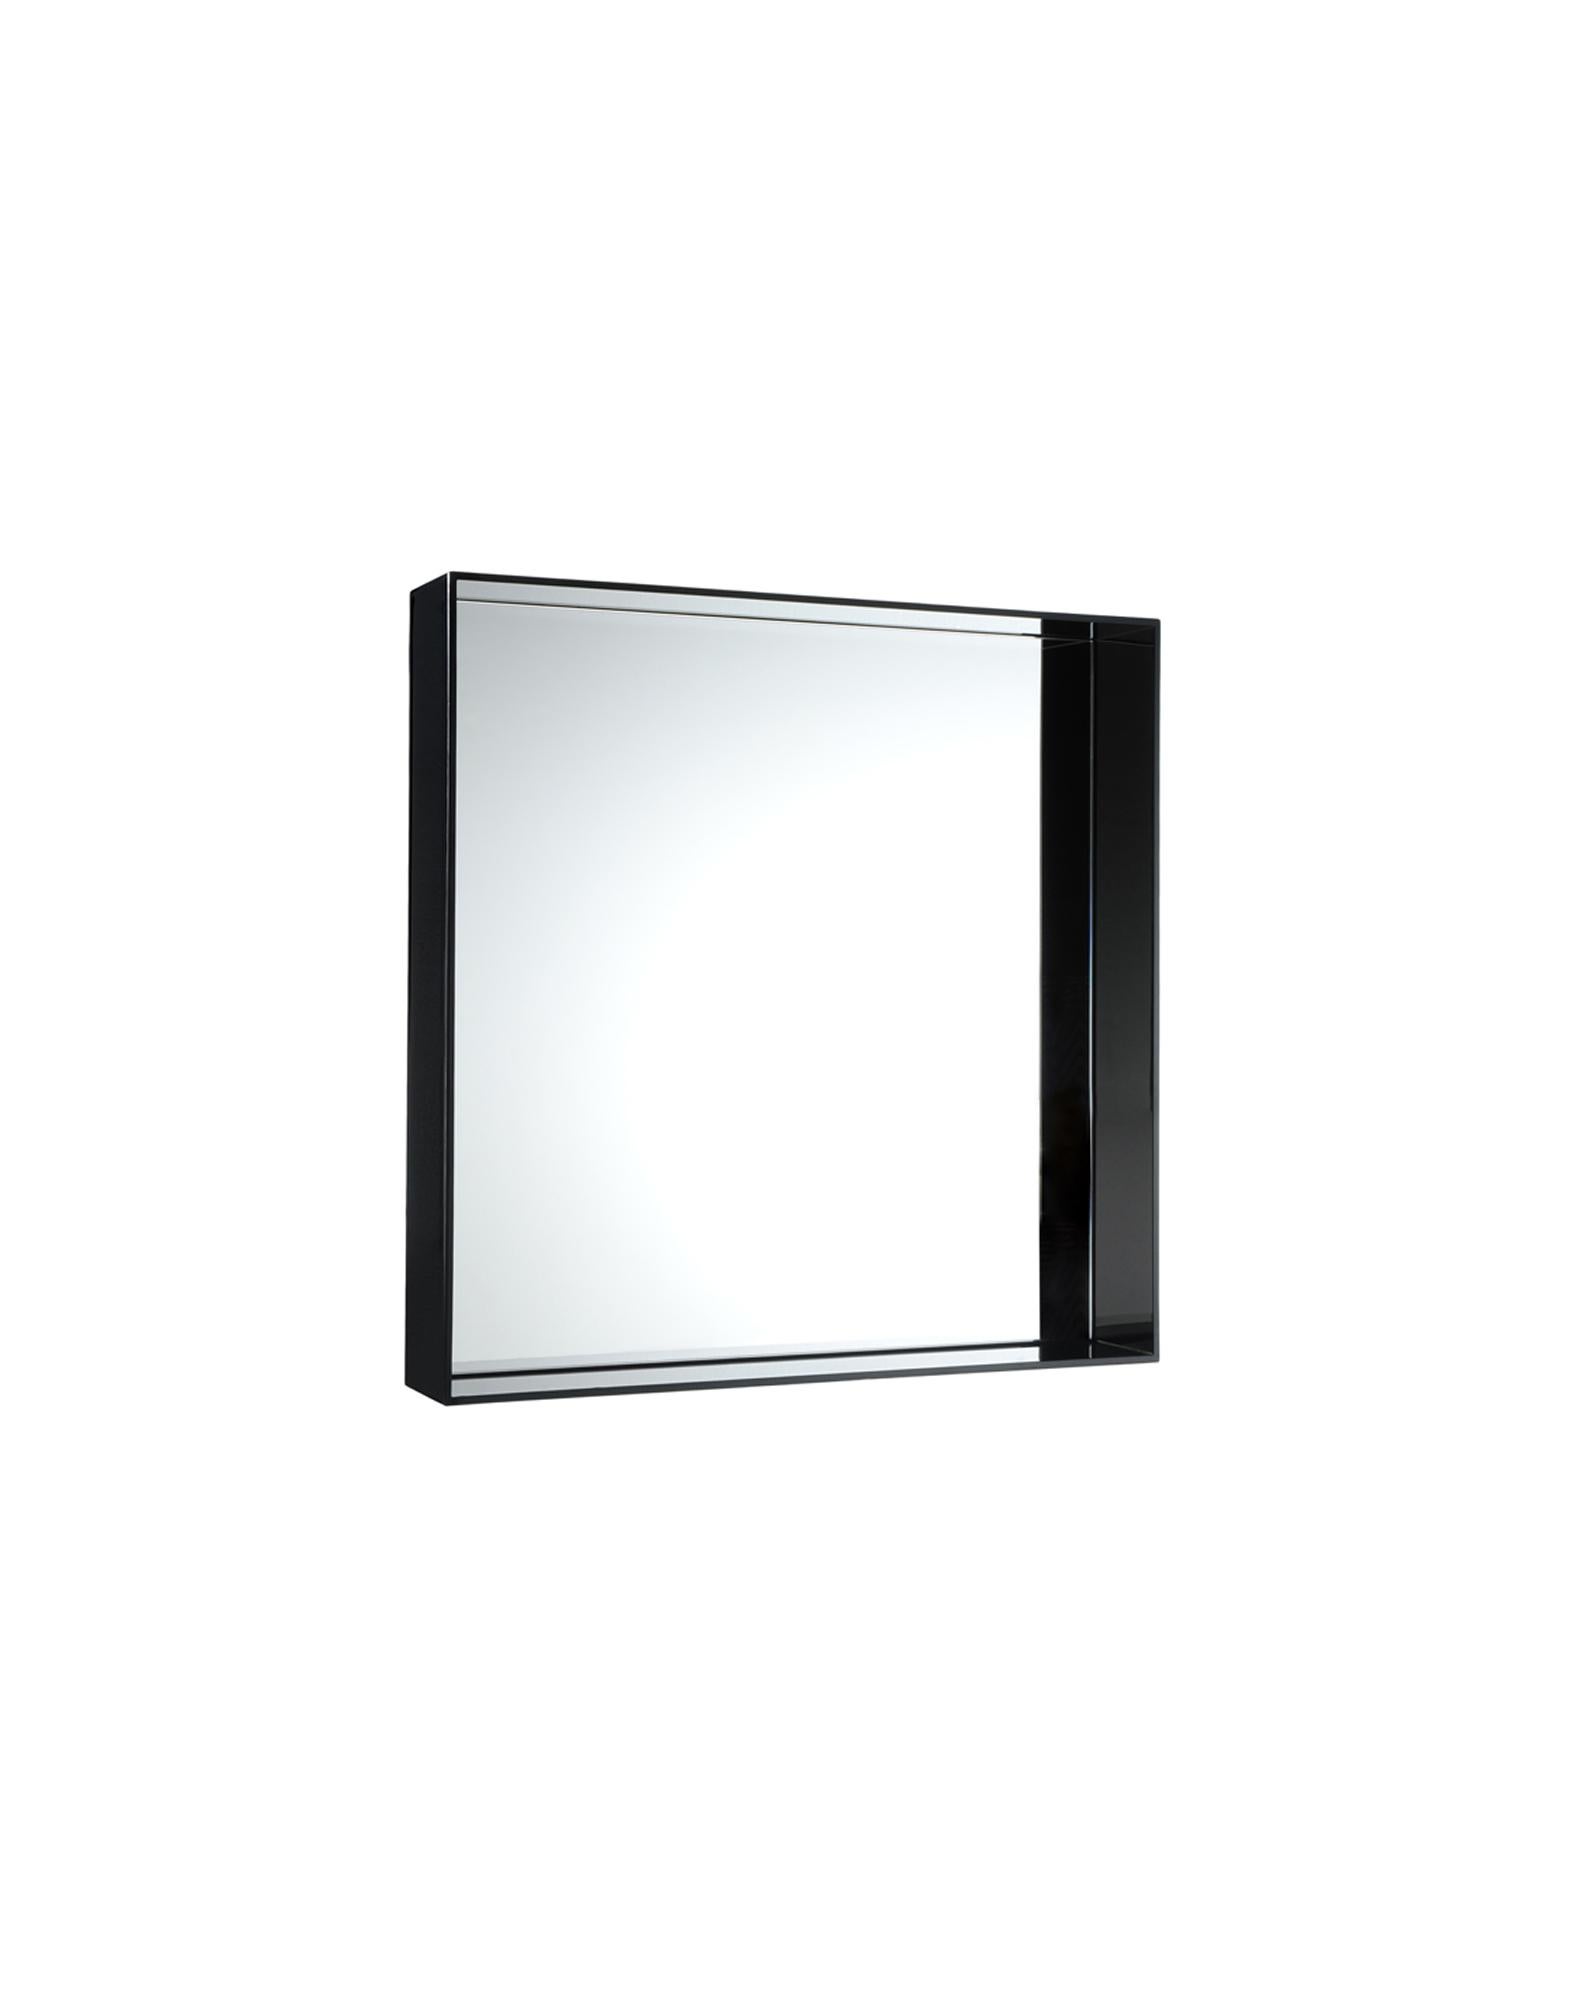 Only Me reflects the narcissist in each of us. Designed by Starck, Only Me is a mirror with a slender 8-cm frame. Only Me in square that can be hung in either direction: 50 x 50 cm.

Dimensions: height: 19.63 in.; width: 19.63 in.; depth: 3.5 in.;